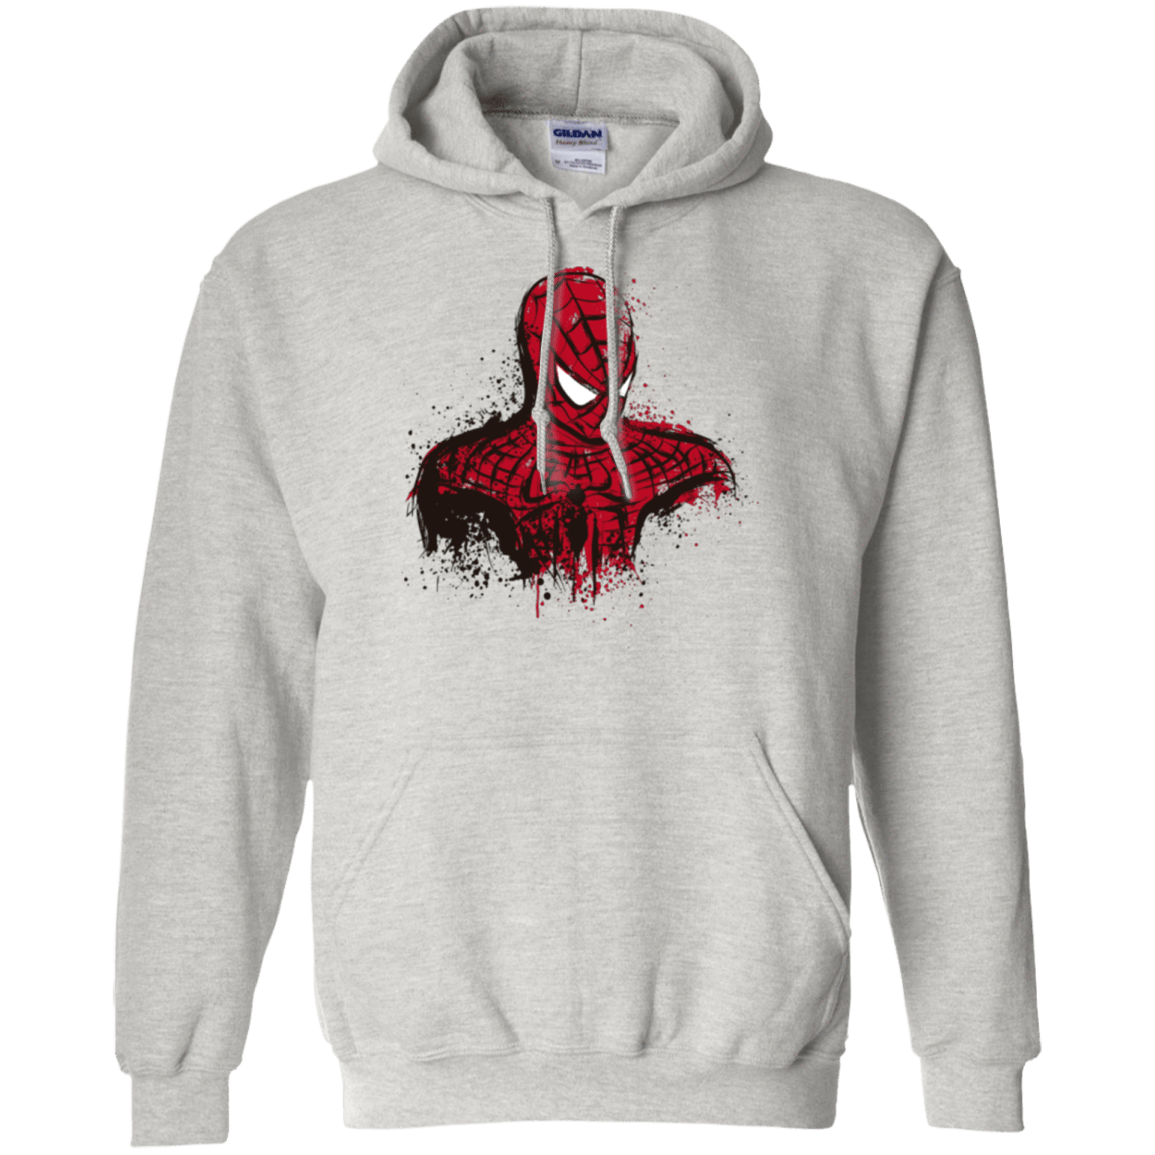 Sweatshirts Ash / Small Behind The Mask Pullover Hoodie